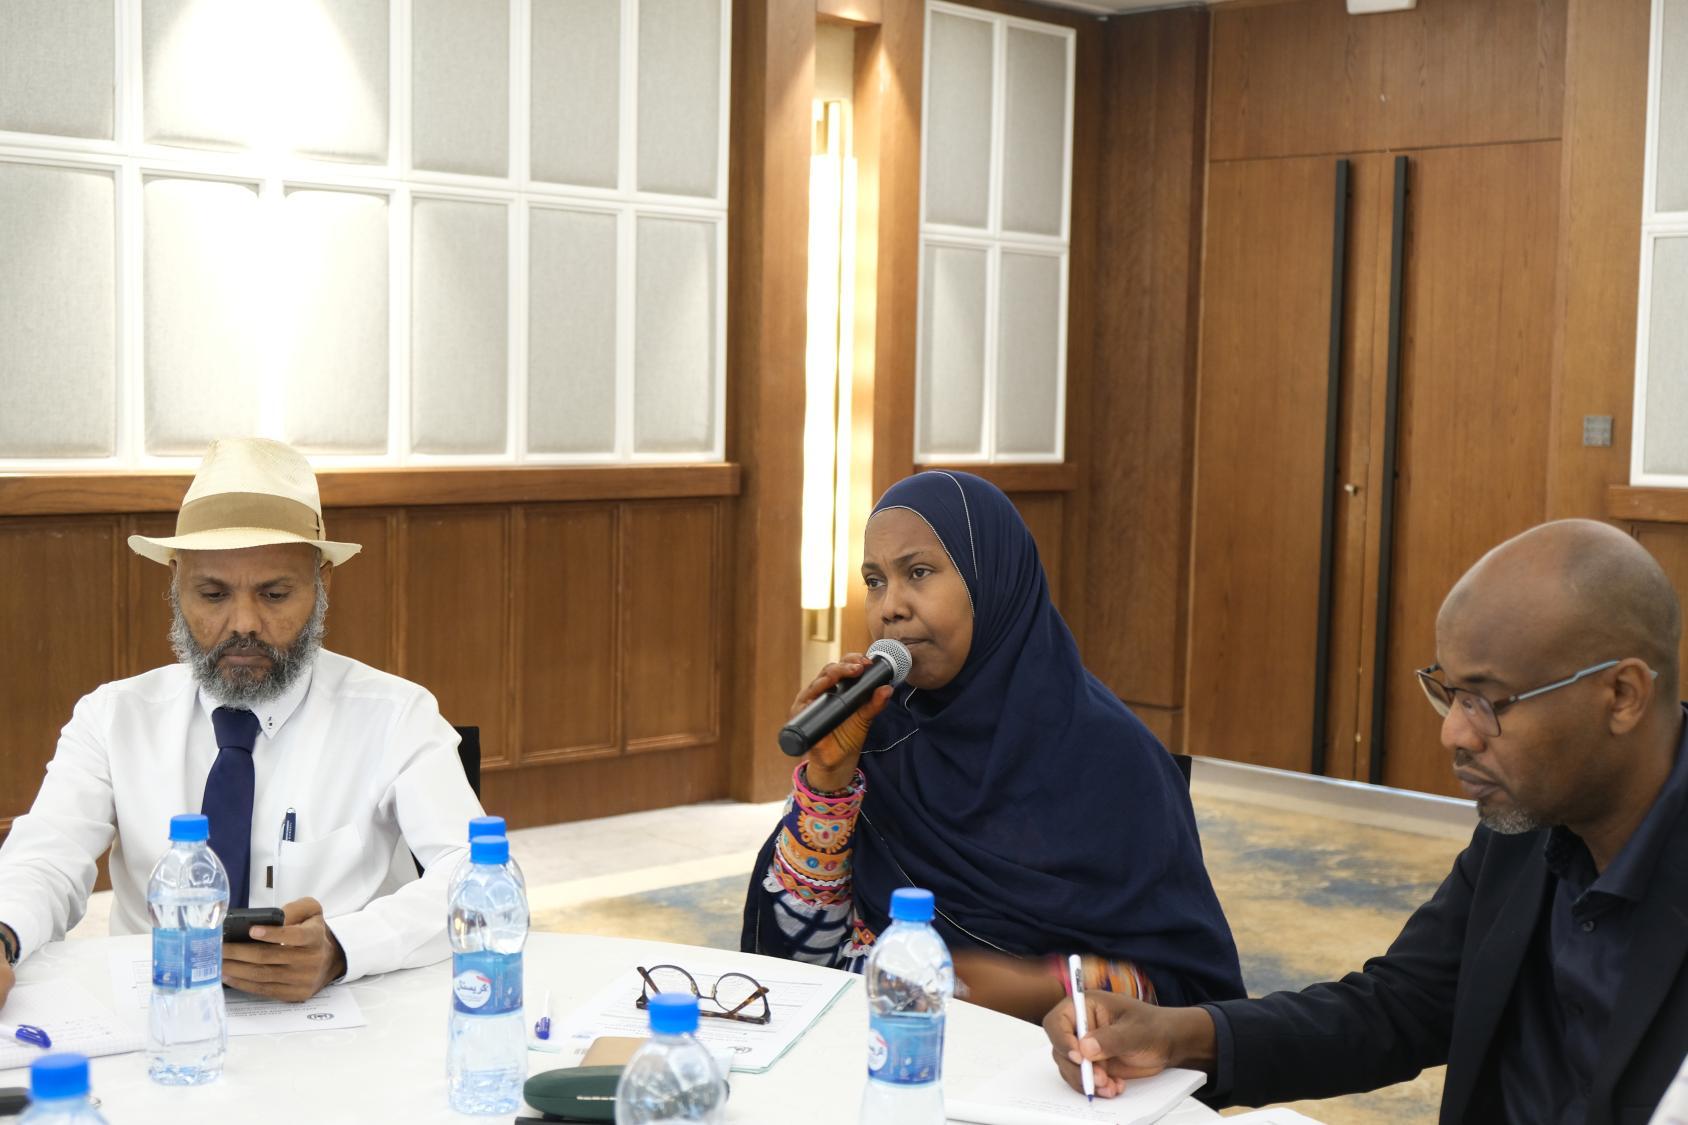 A woman in a head scarf is using a microphone at a table. Beside her is a man in a black suit and a man in a white suit wearing a hat 